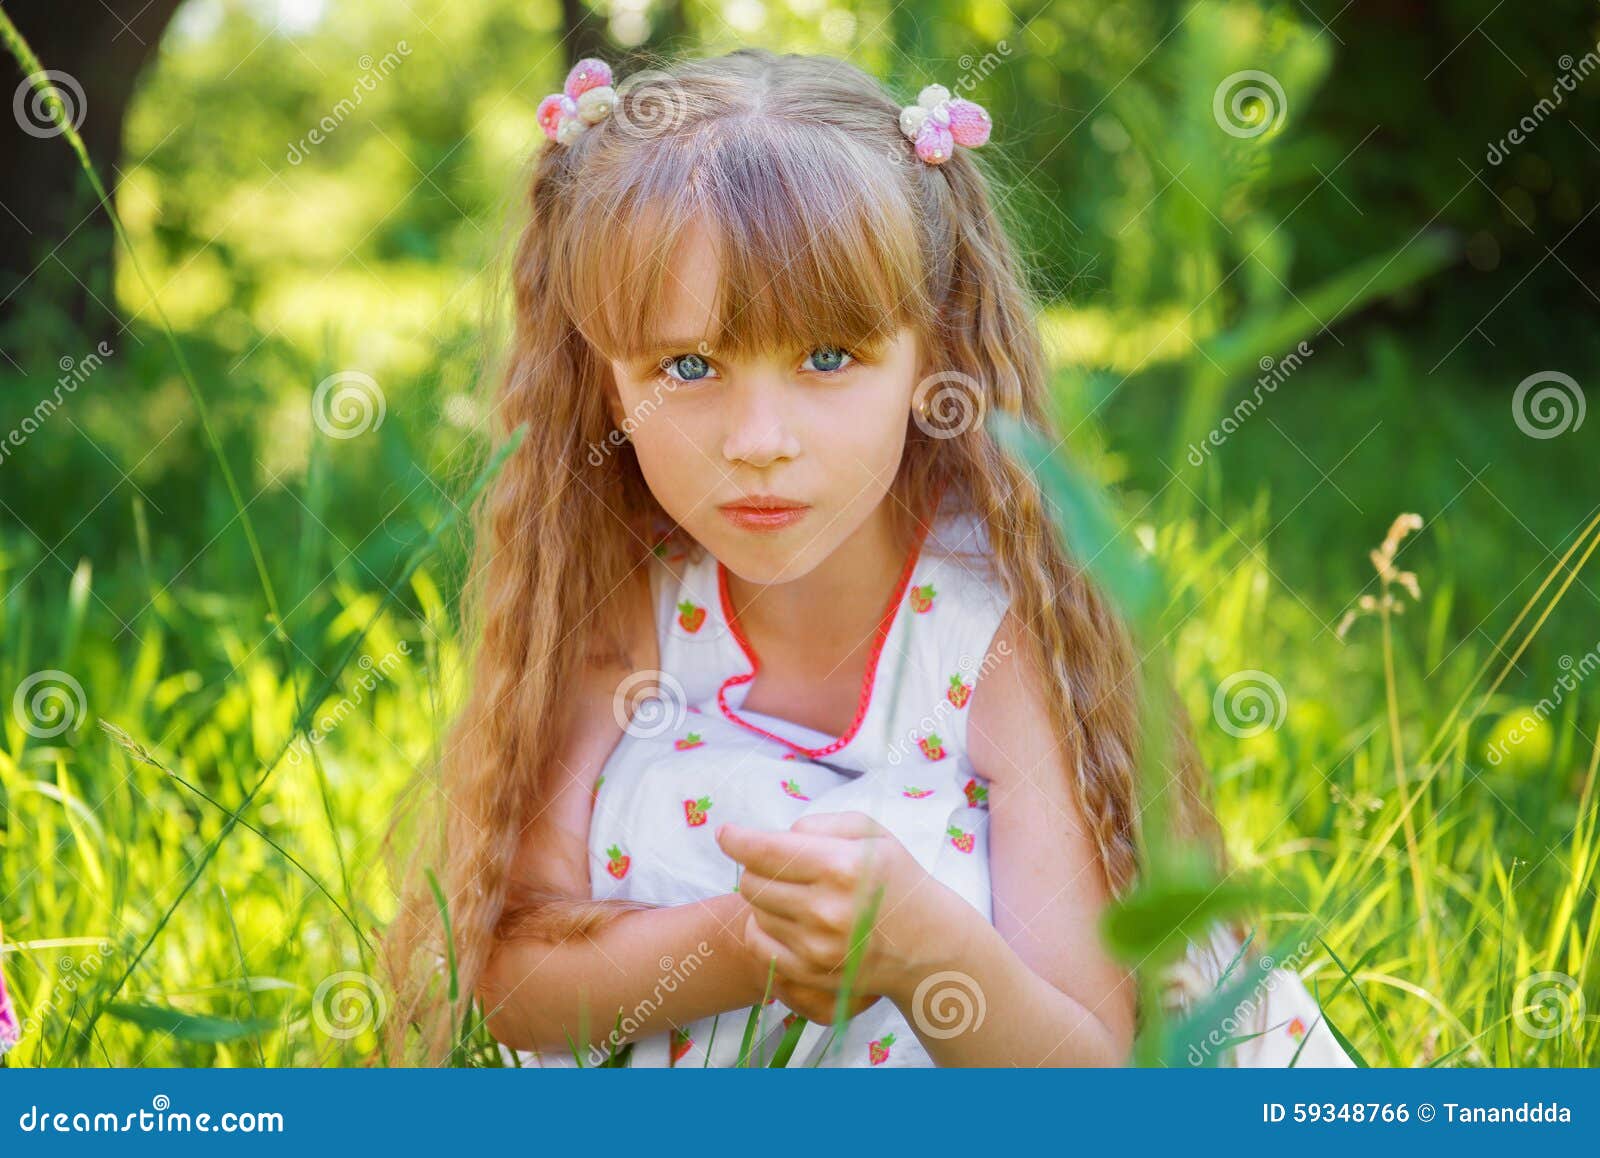 Cute Little Girl Sitting On The Grass On Stock Photo - Image: 59348766